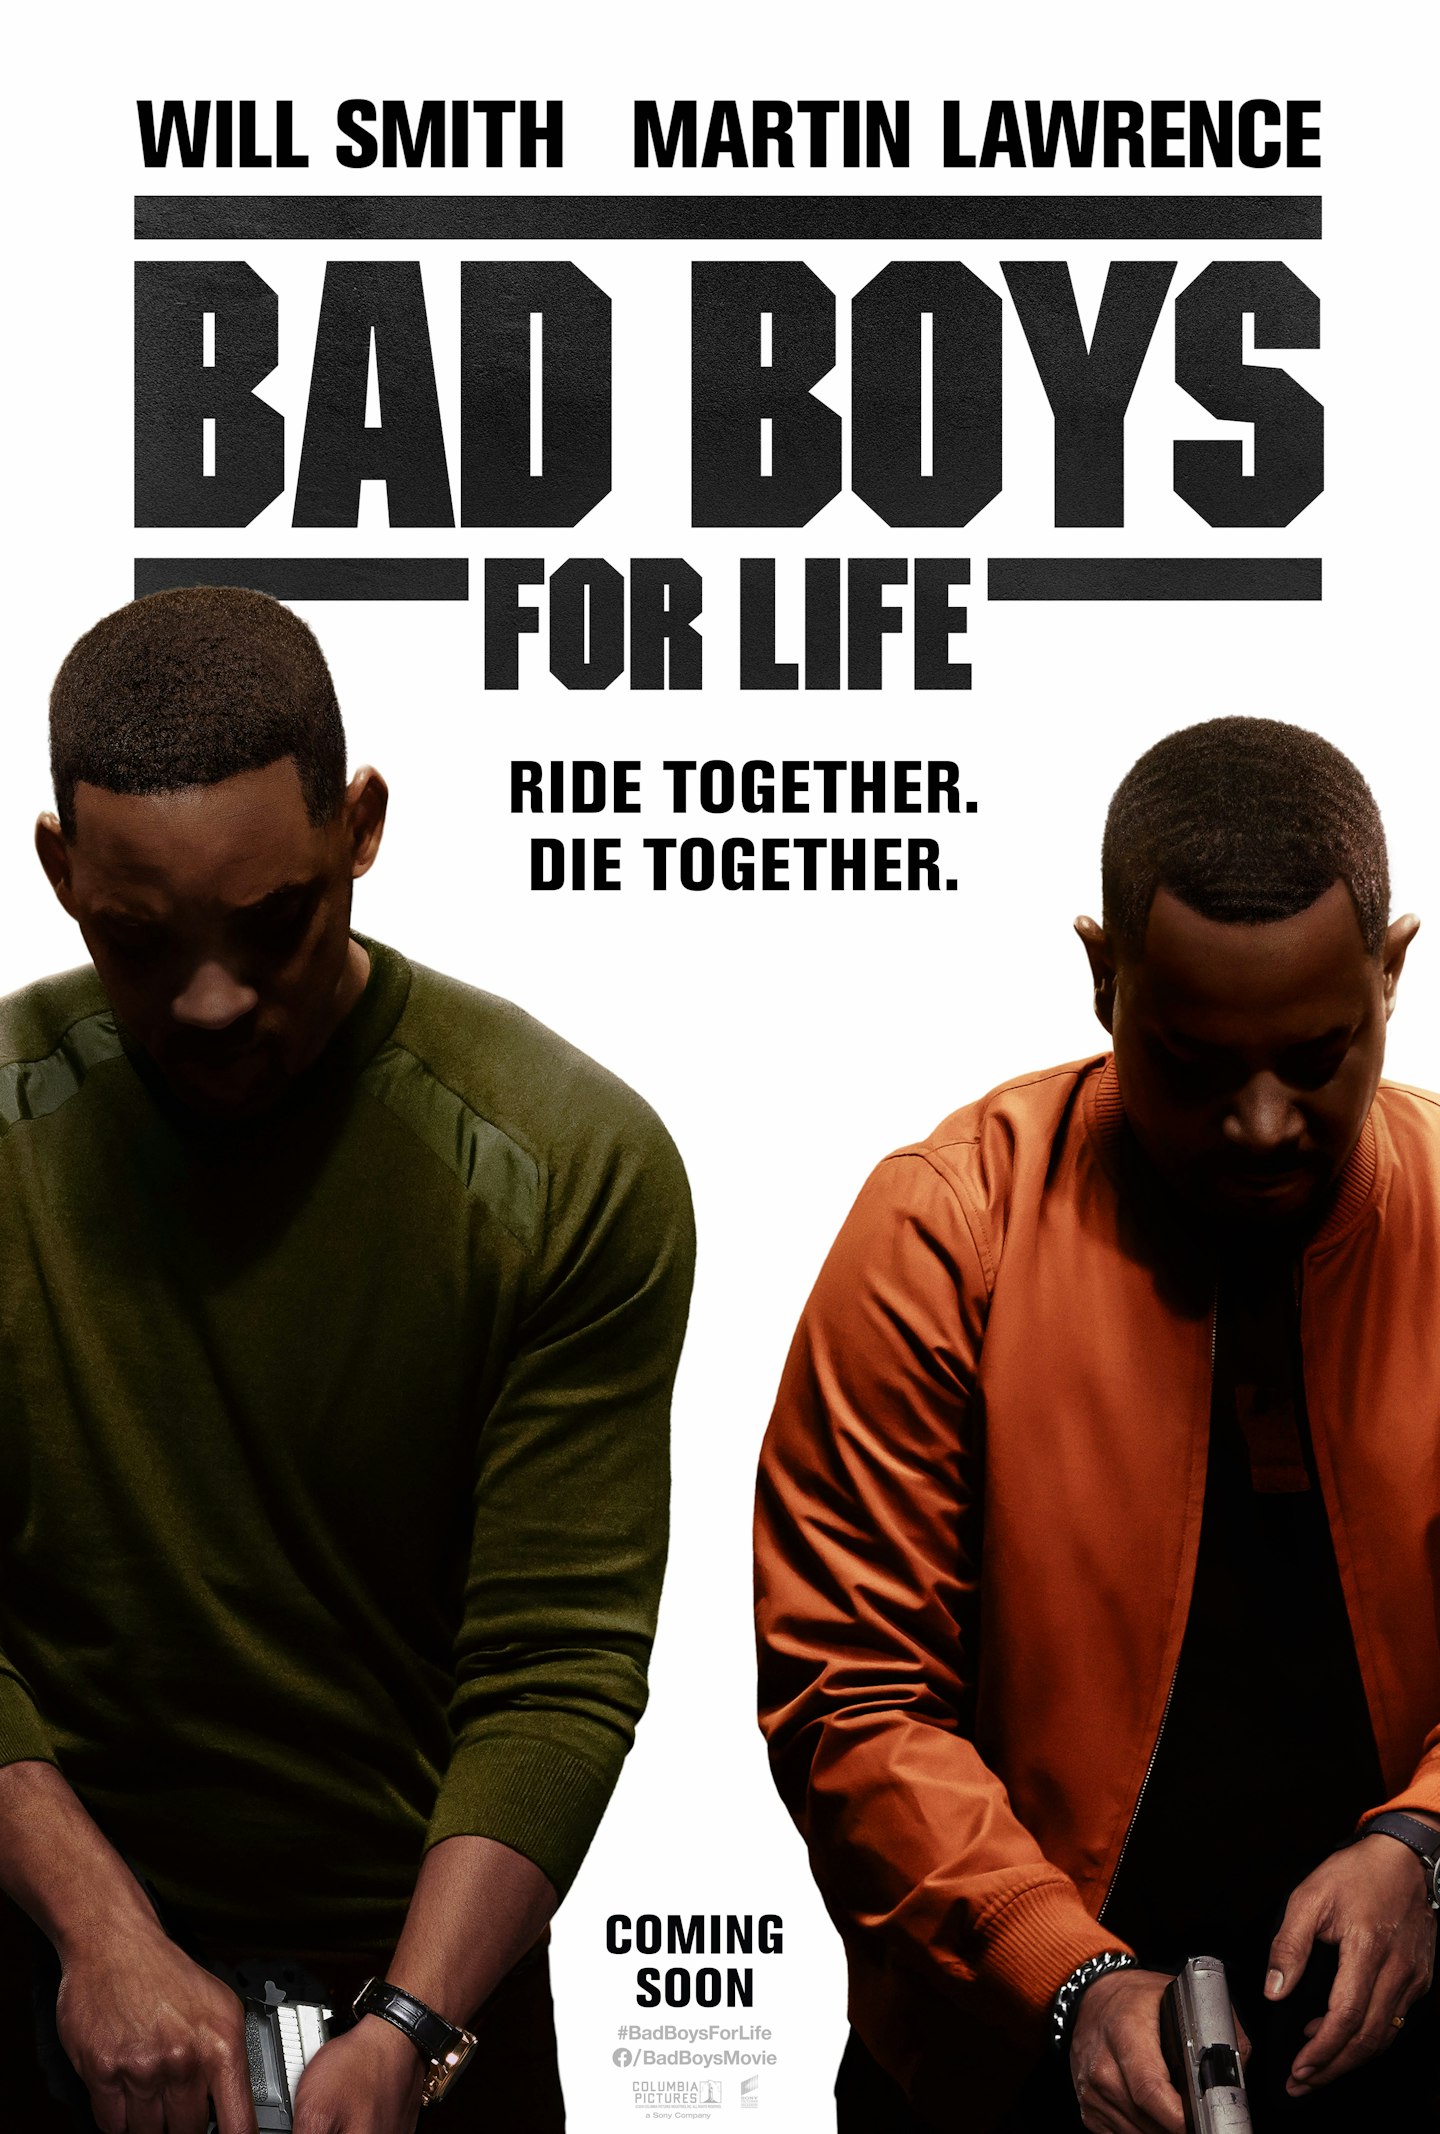 Bad Boys For Life poster